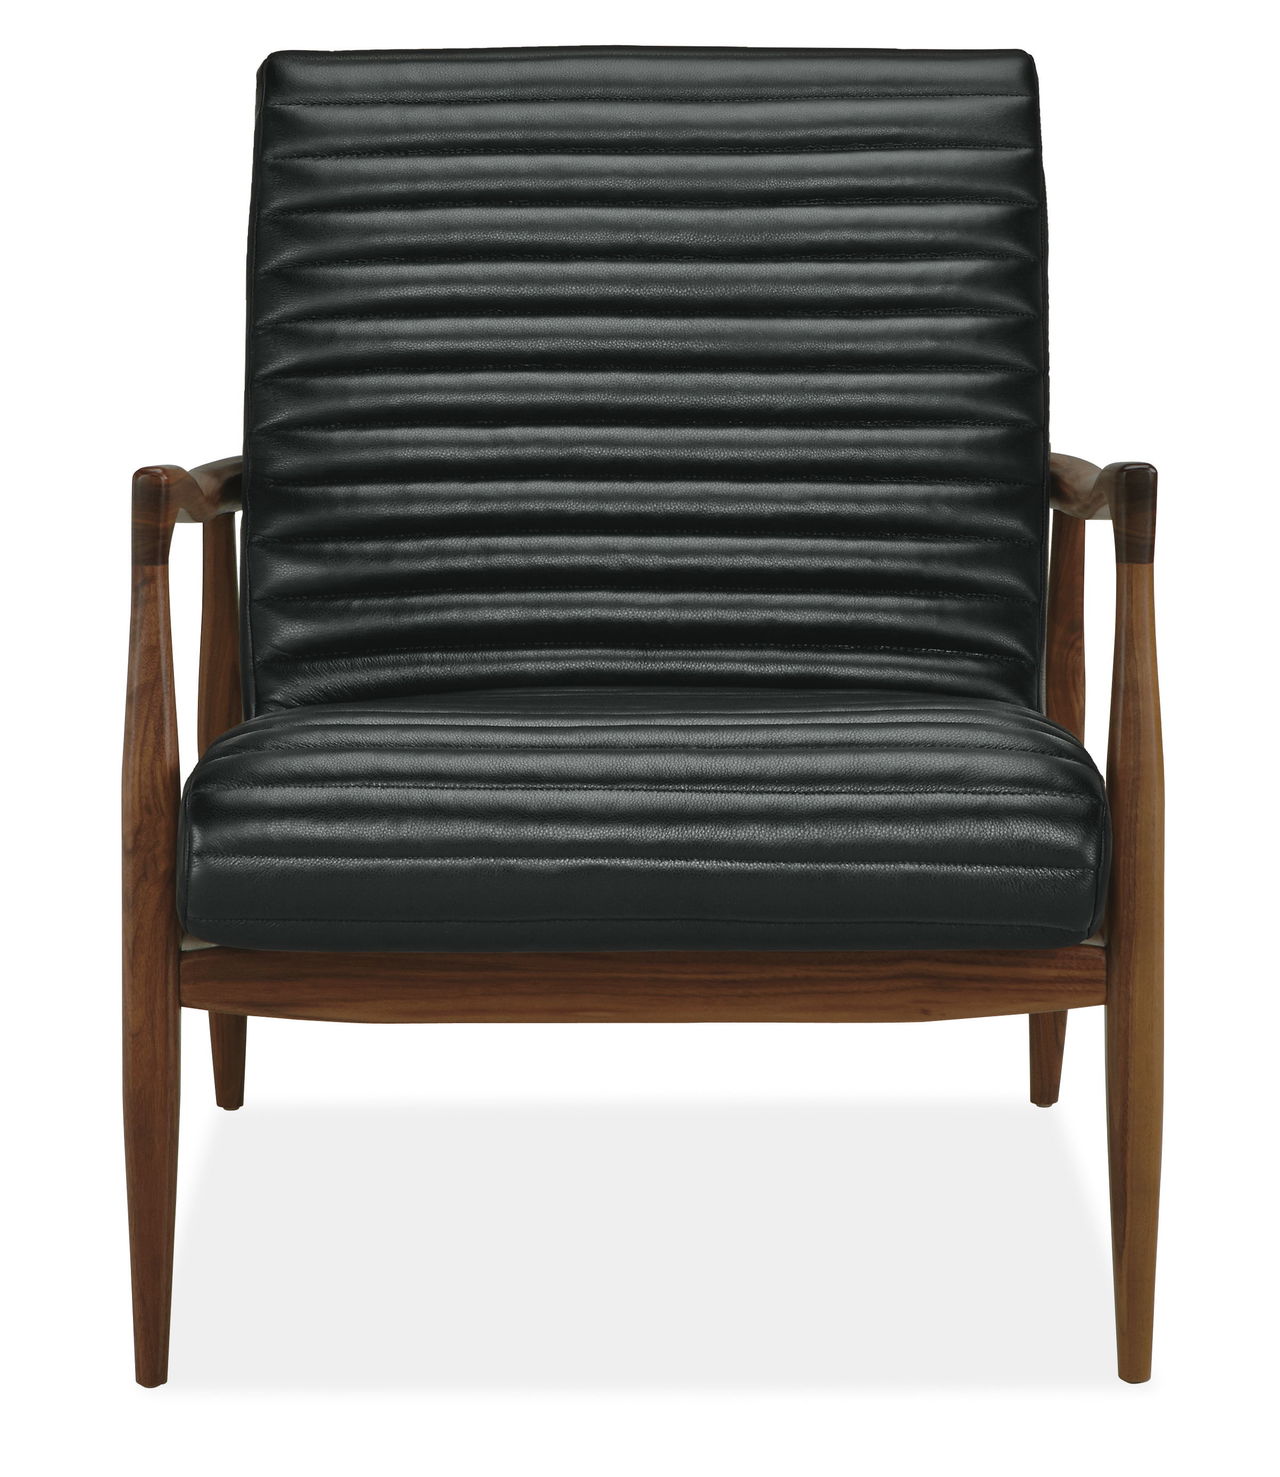 The leather-and-wood Callan Chair from Room & Board won’t overwhelm tight spaces.